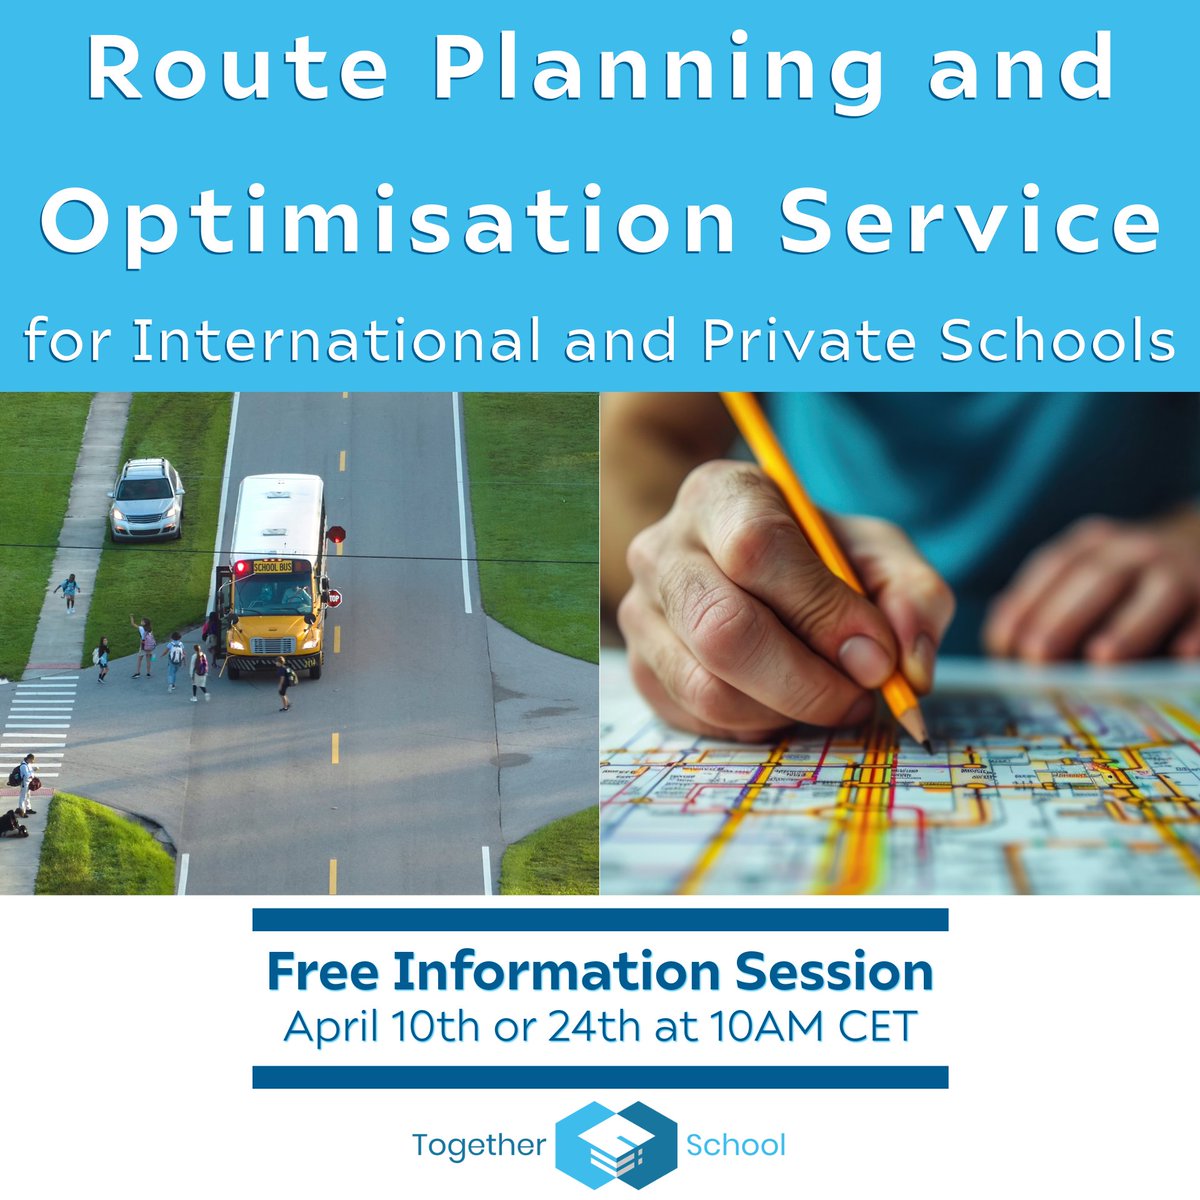 How long will your school spend planning bus routes this summer?  Join our information session to learn how Together School can reduce your planning time from weeks to days. Register here - zurl.co/JFQT #schoolleaders 
#internationalschools
#schooltransport